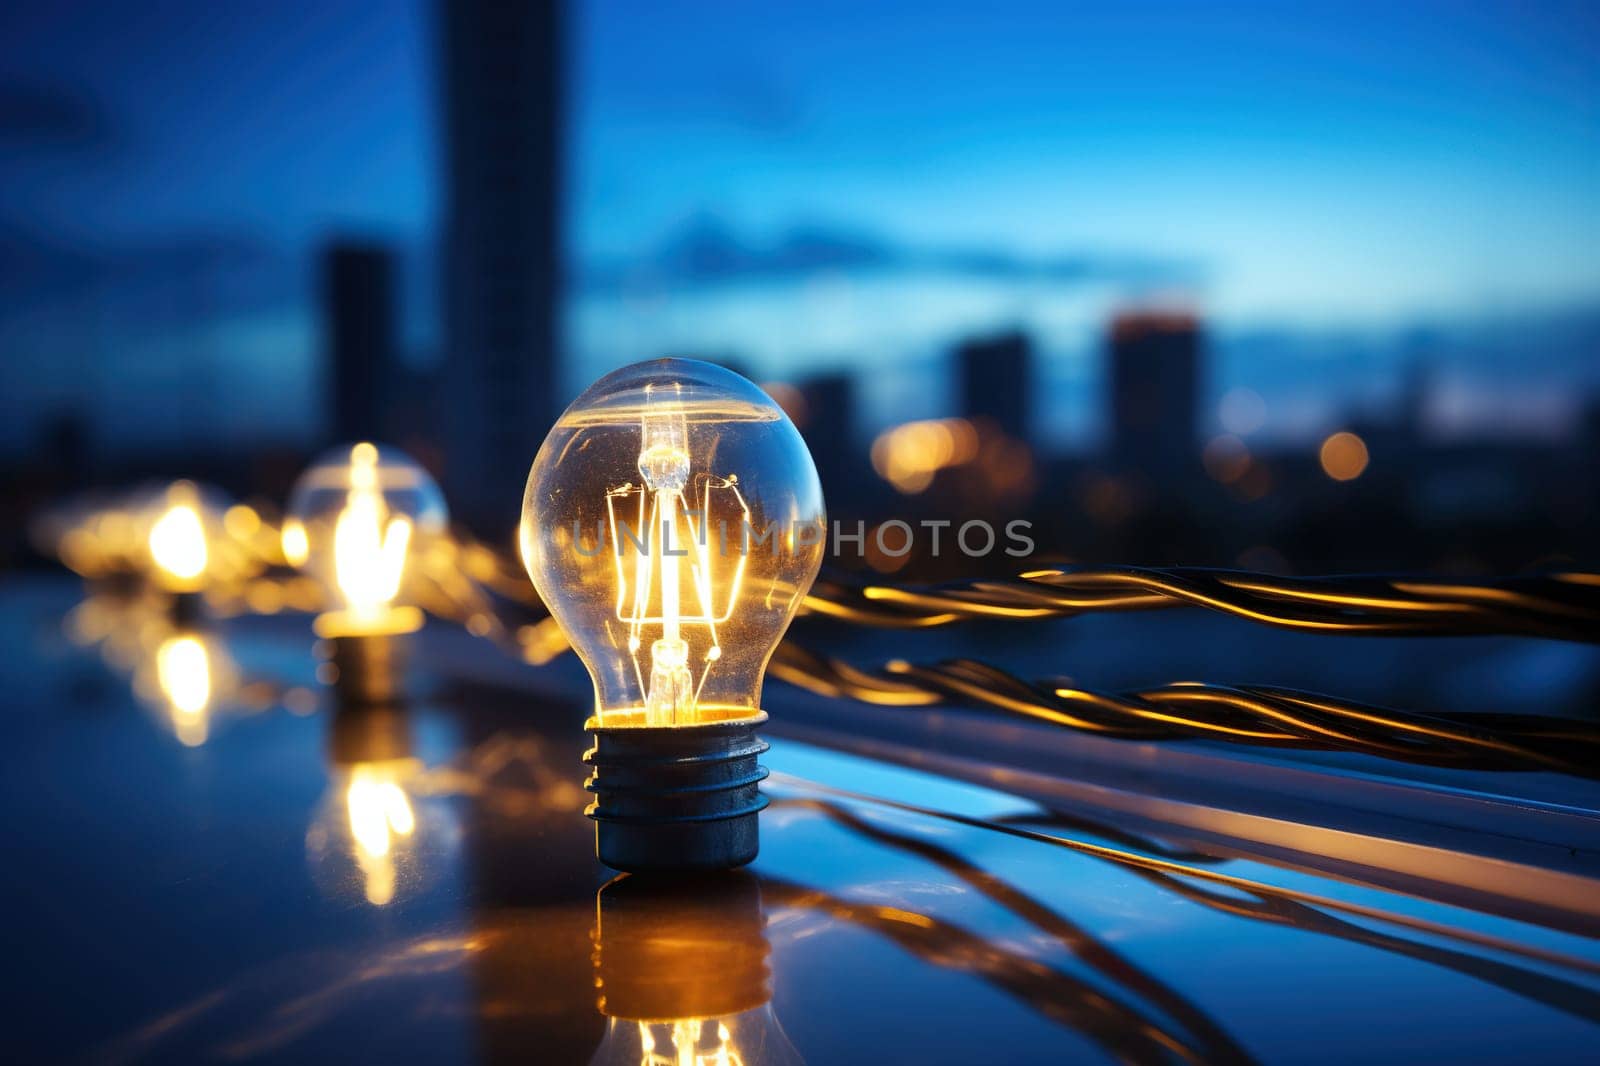 Light bulb against the backdrop of a blurred city in the evening. Electric energy concept.